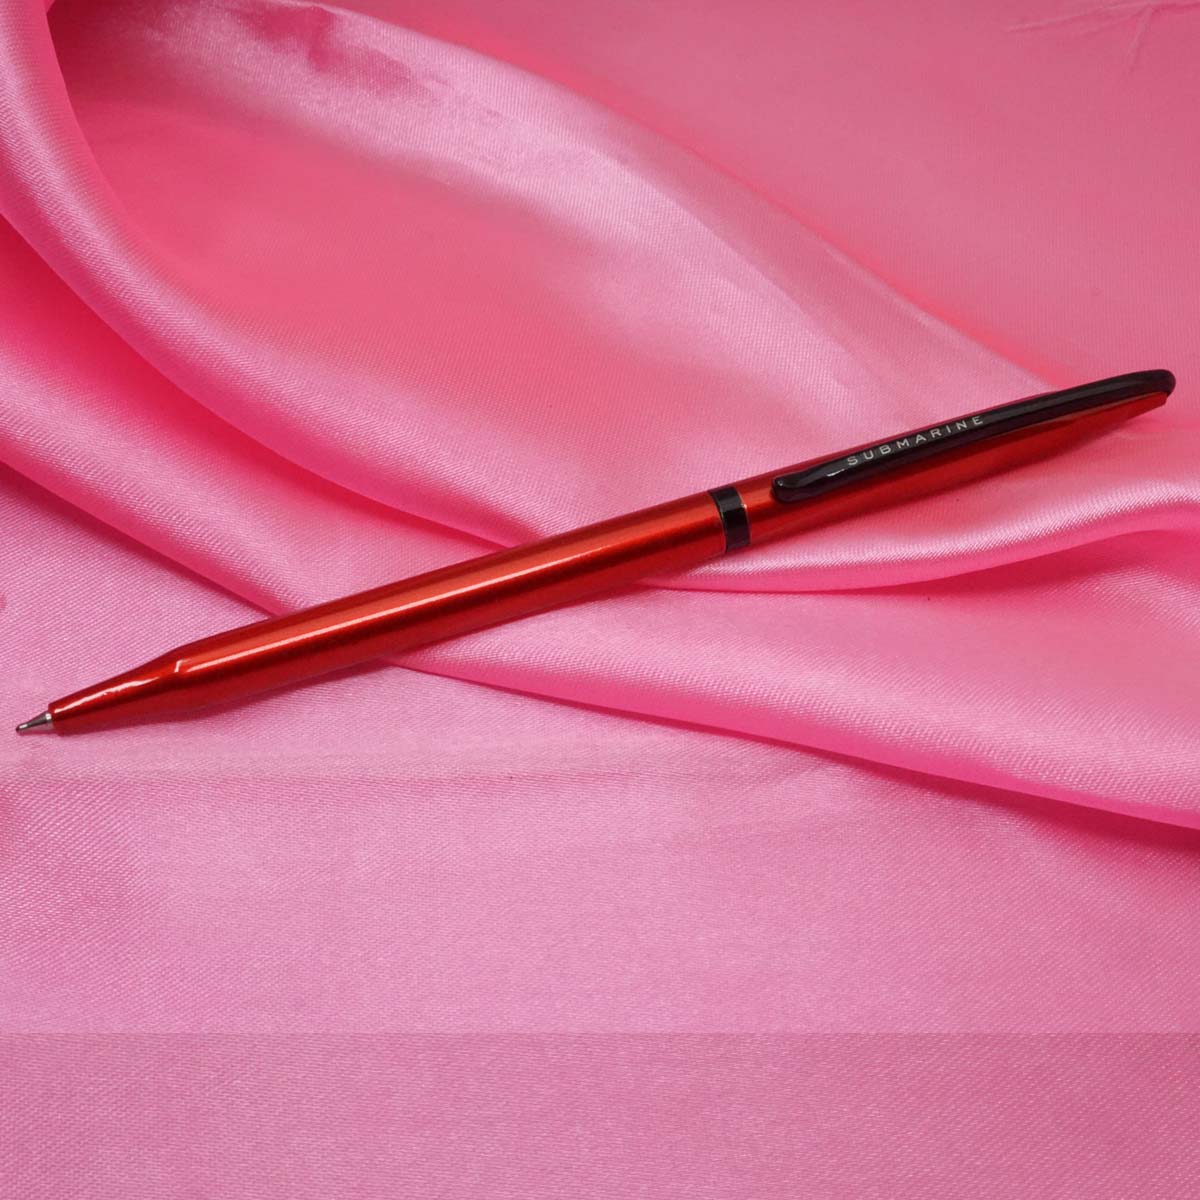 Submarine 989 Slim Glossy Finish Red Color With Black Clip Fine Tip Twist Type Ball Pen SKU 21029